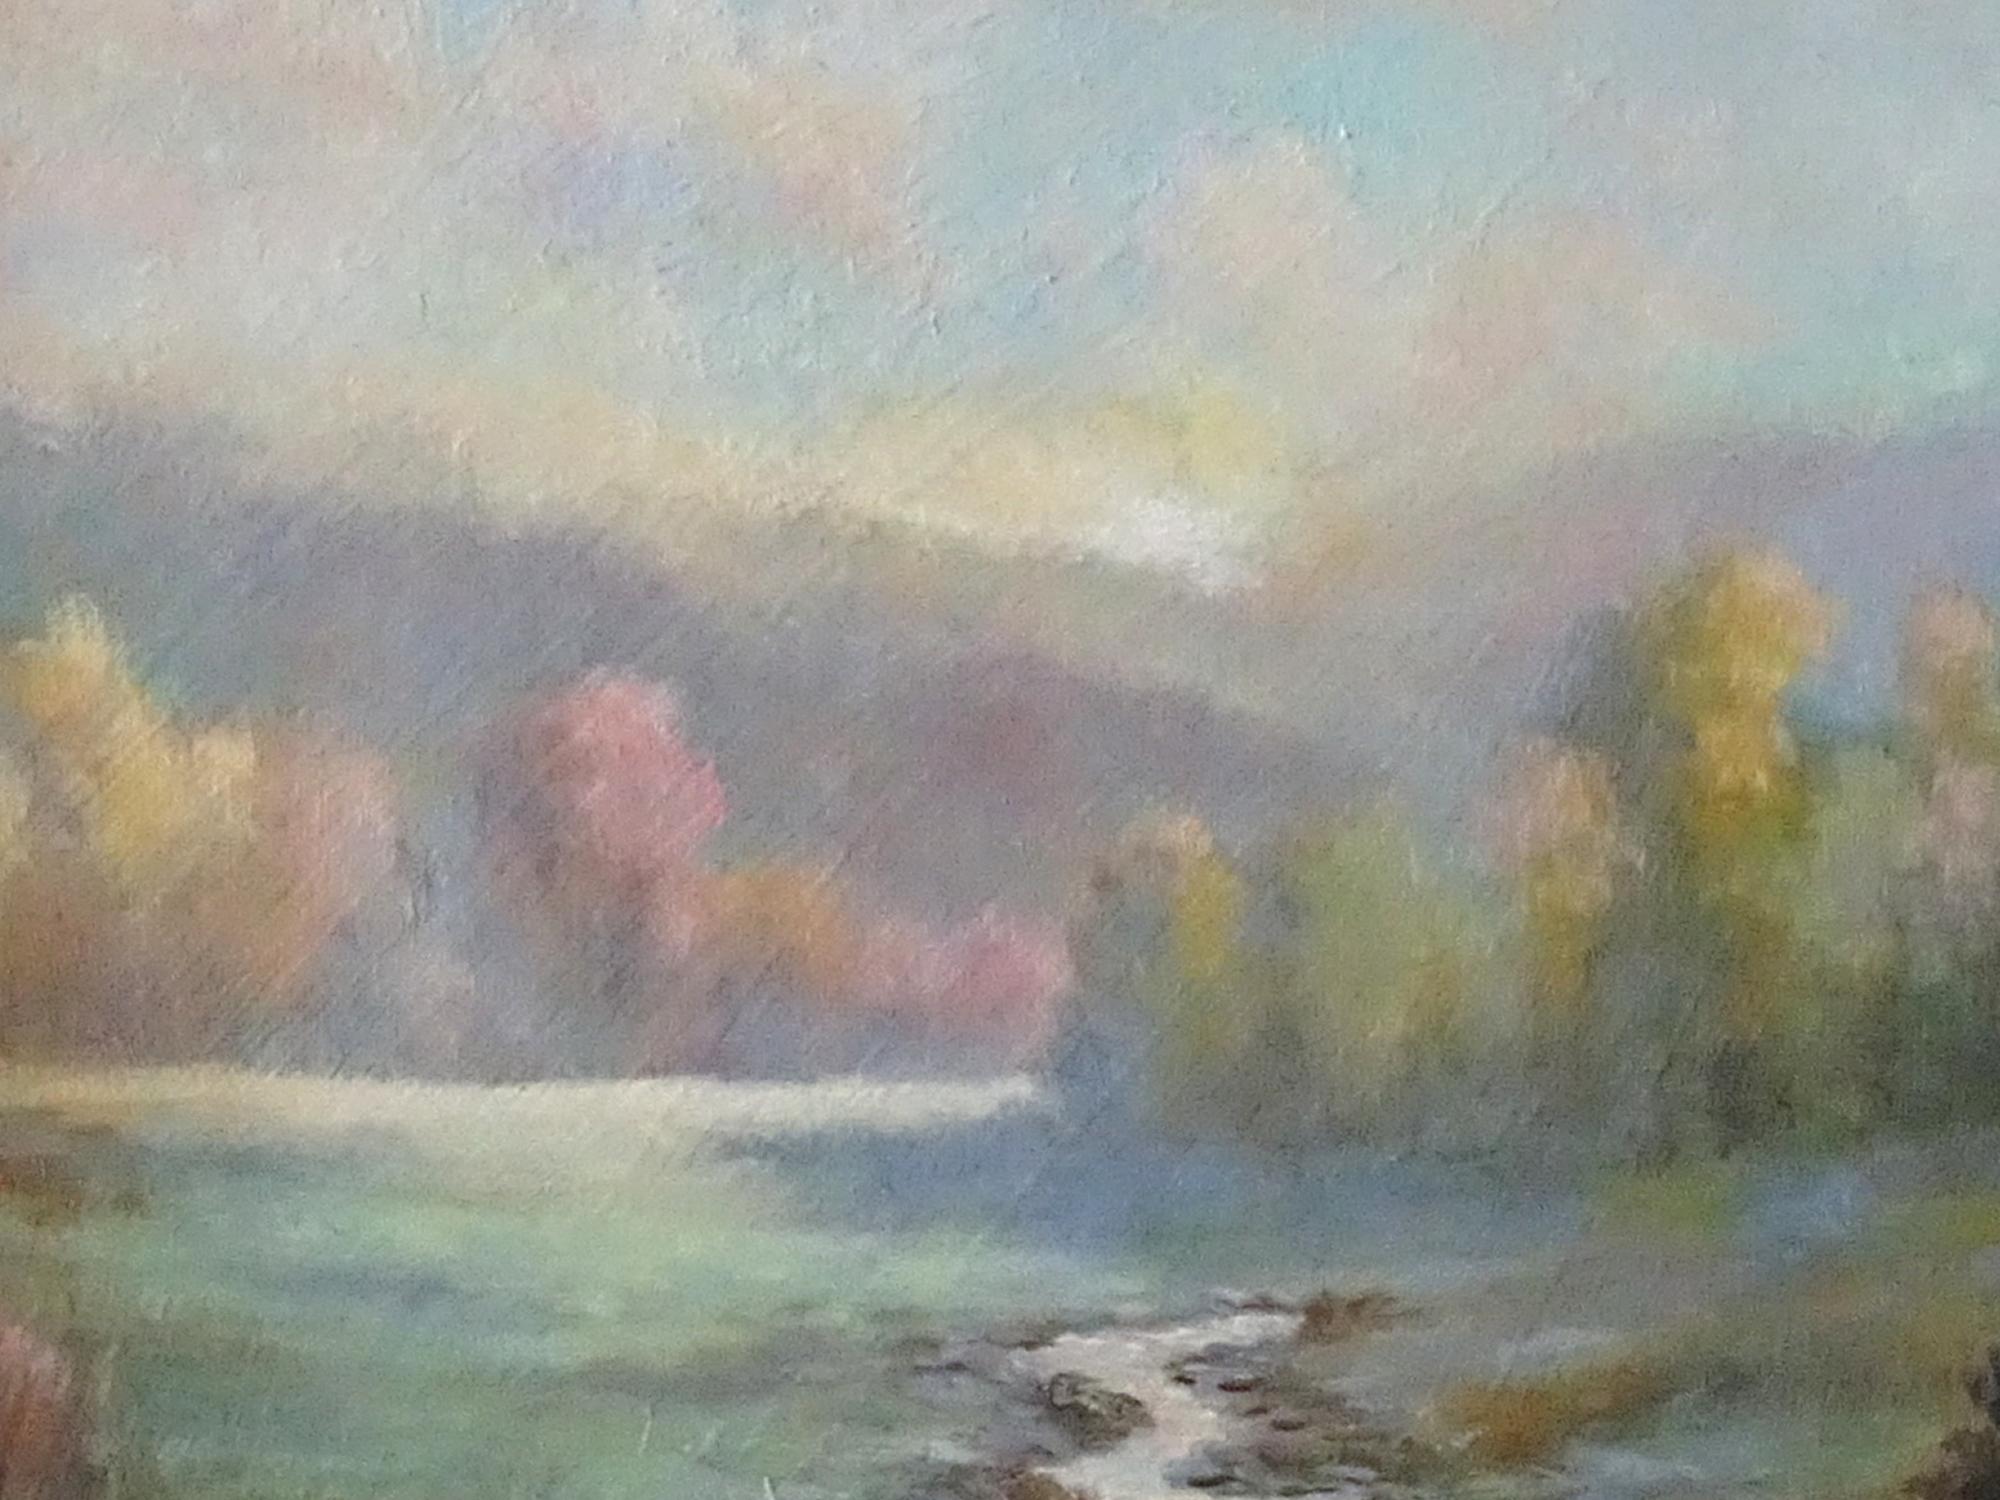 <p>Artist Comments<br>Artist Gail Greene shows a picturesque stream in a luminous impression using soft tonal shades. The morning light reaches over the ridge, casting a glow on the rustling meadow below. The colorful autumn palette parades the